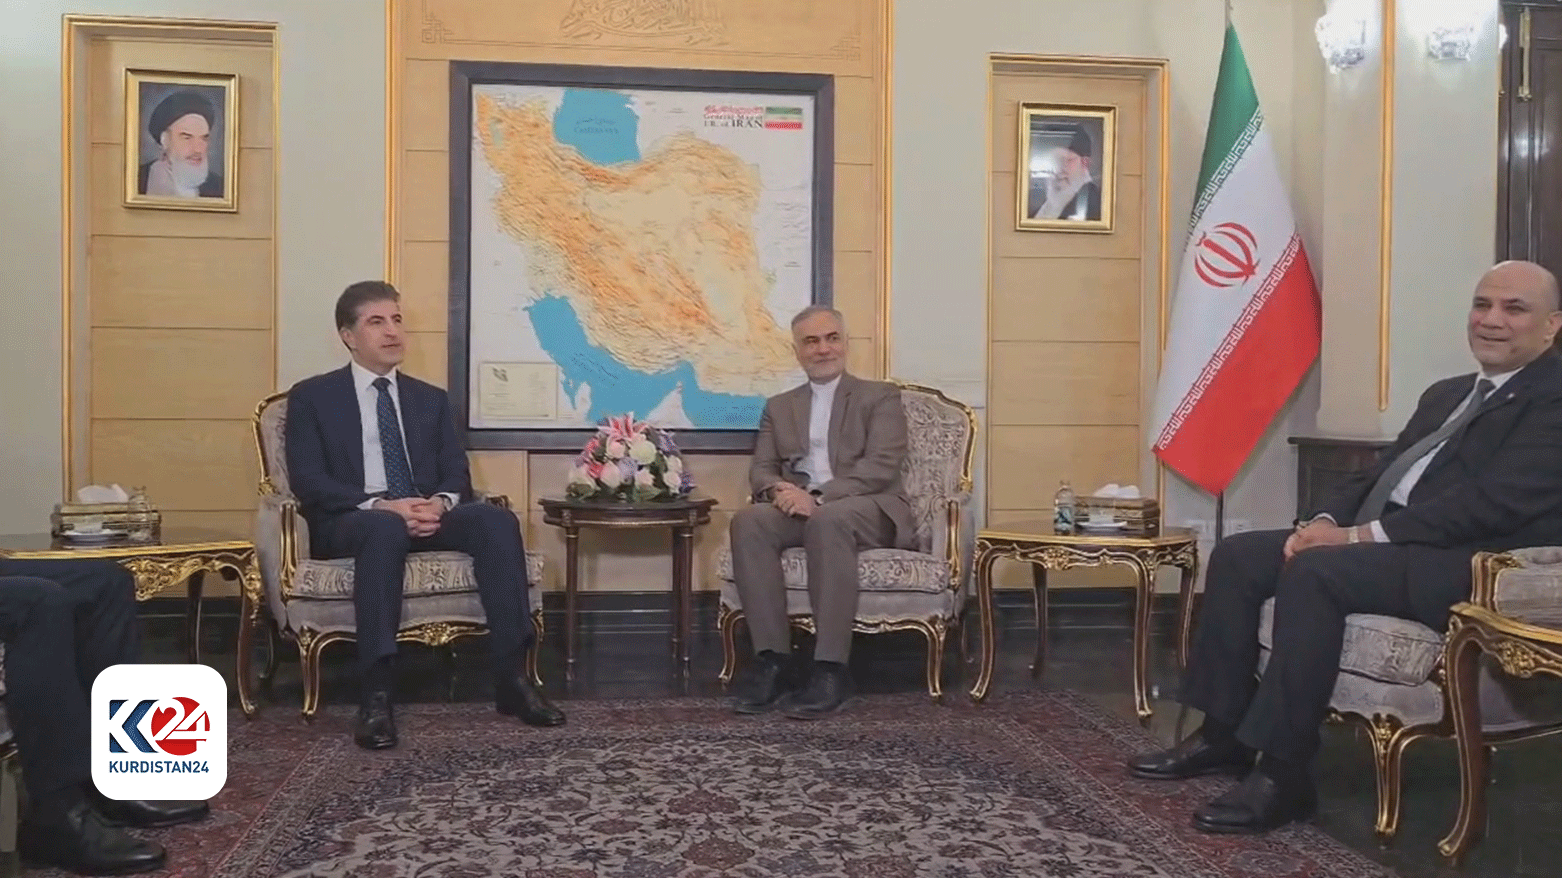 PM Chairs a Meeting with Service Departments in AlAnbar Province